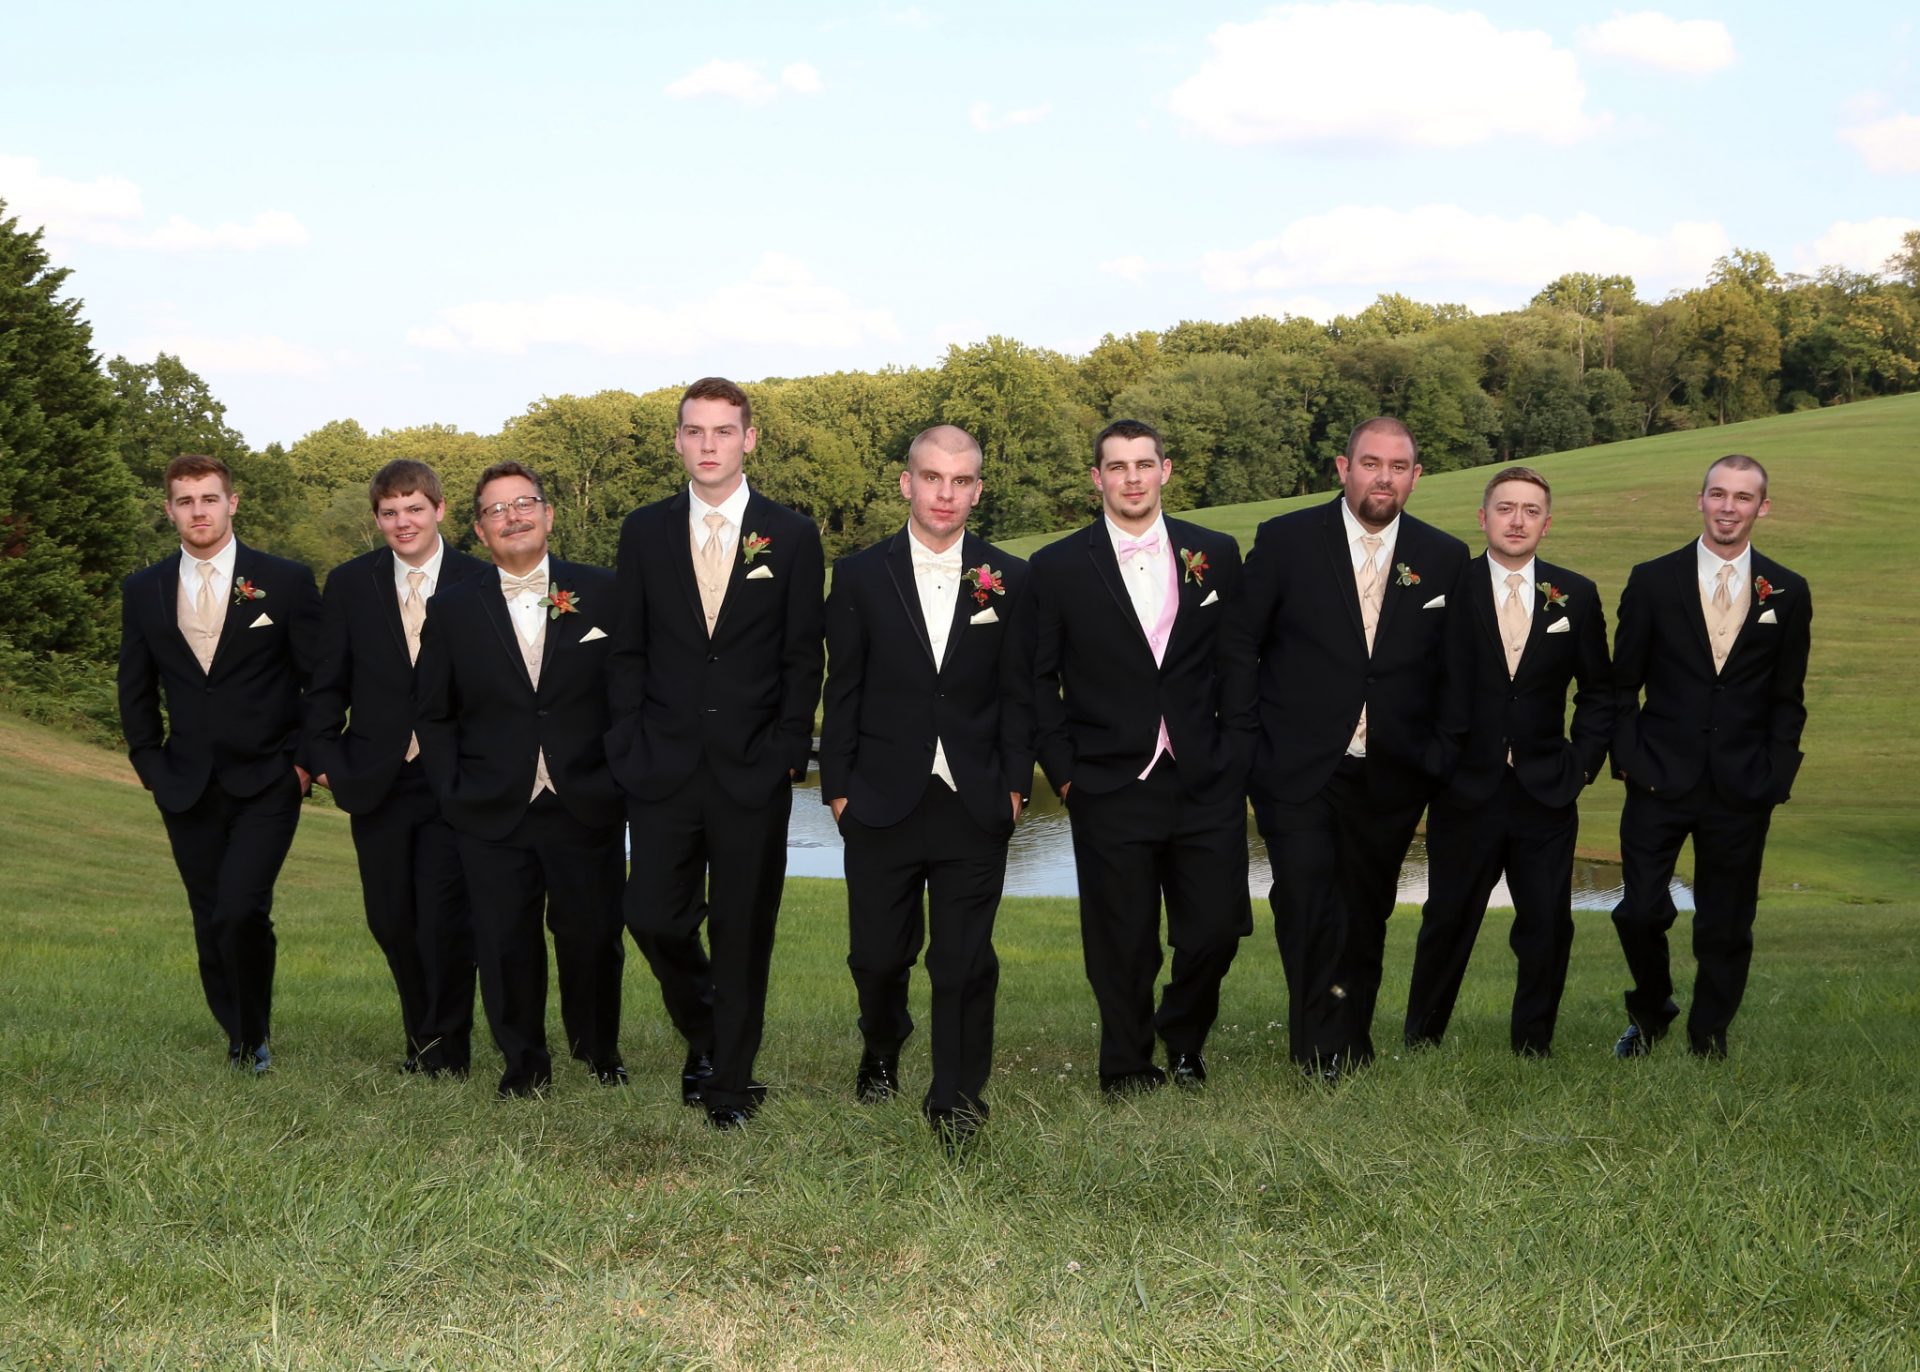 Groom and Groom's men pose outside of groom's room before the outdoor wedding in Maryland